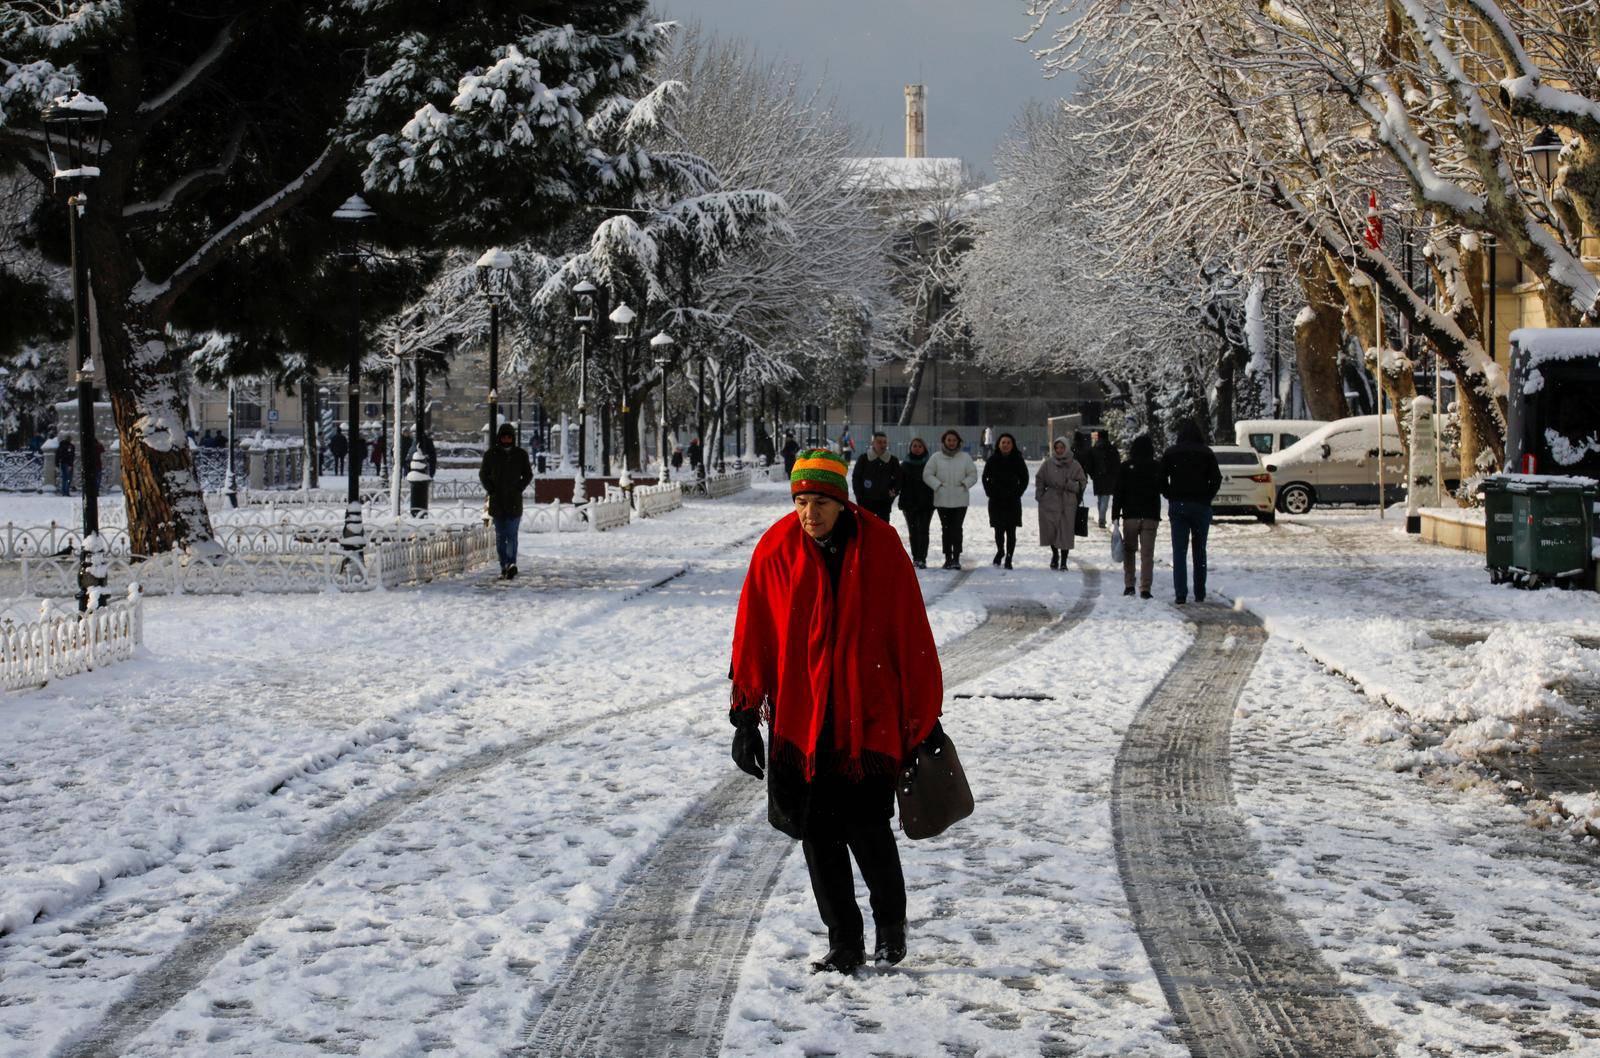 People walk through Sultanahmet Square during a snowy day in Istanbul